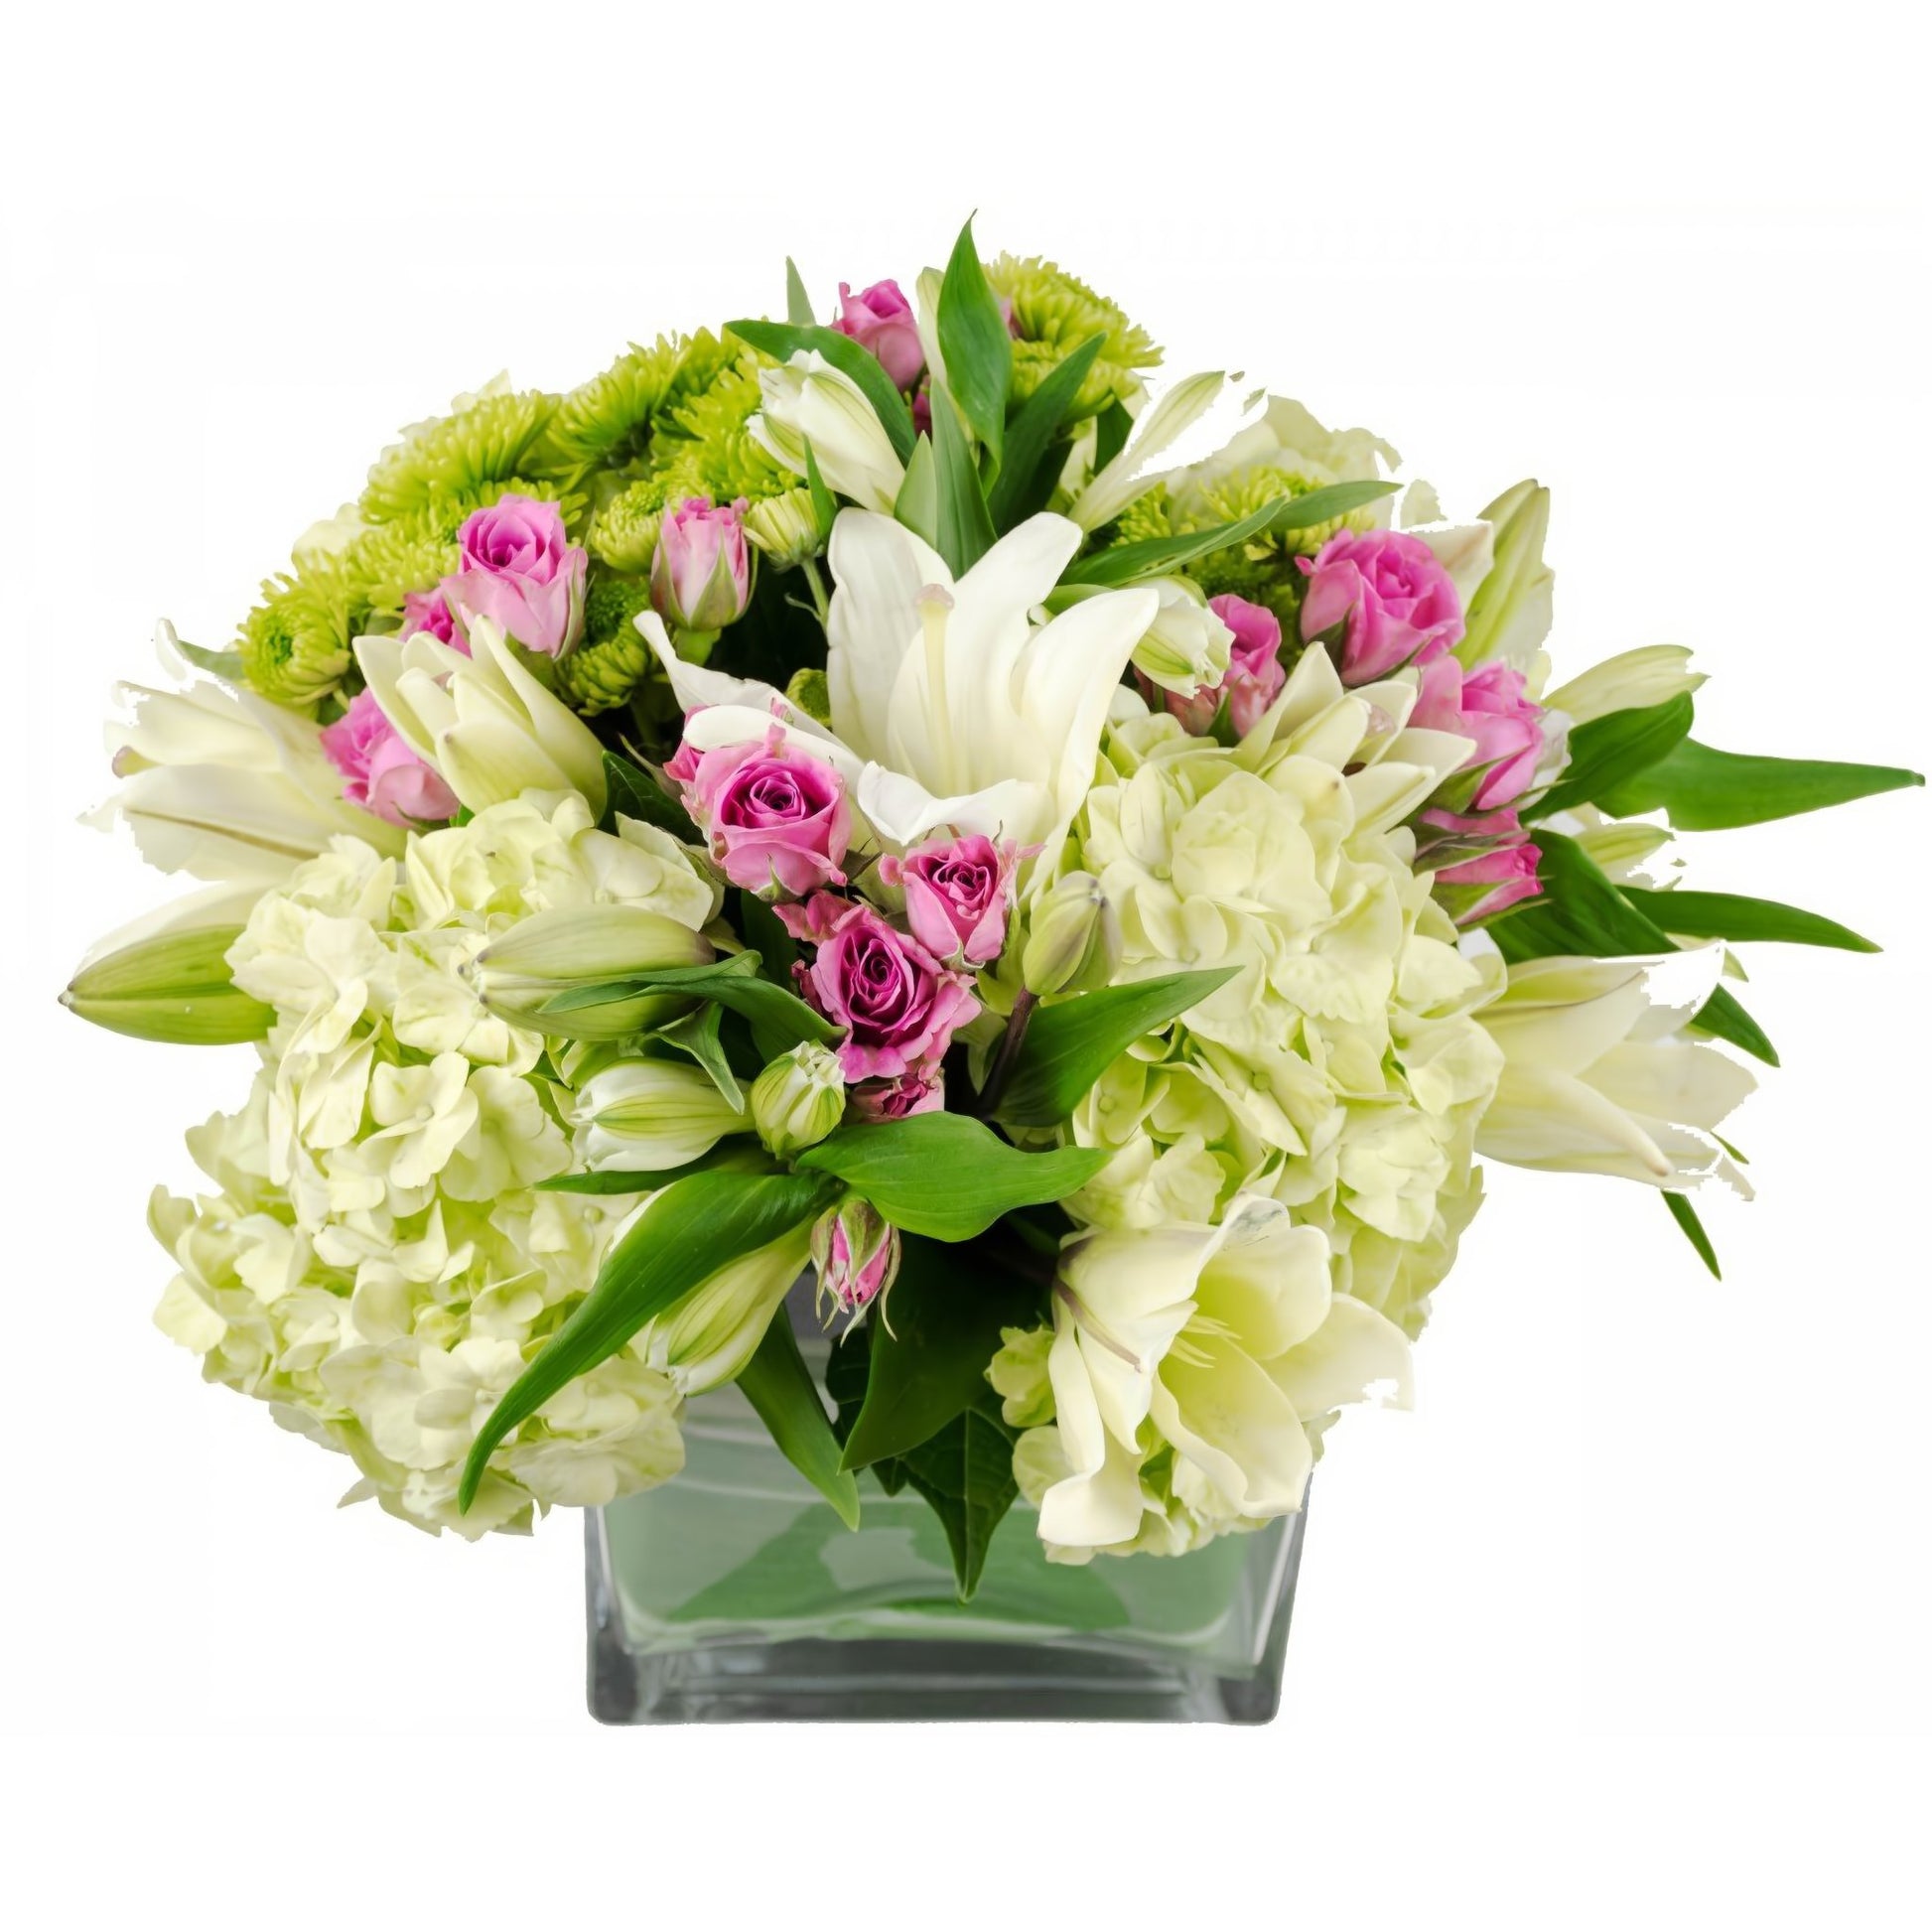 Magnificent Madison - Floral Arrangement - Flower Delivery Brooklyn